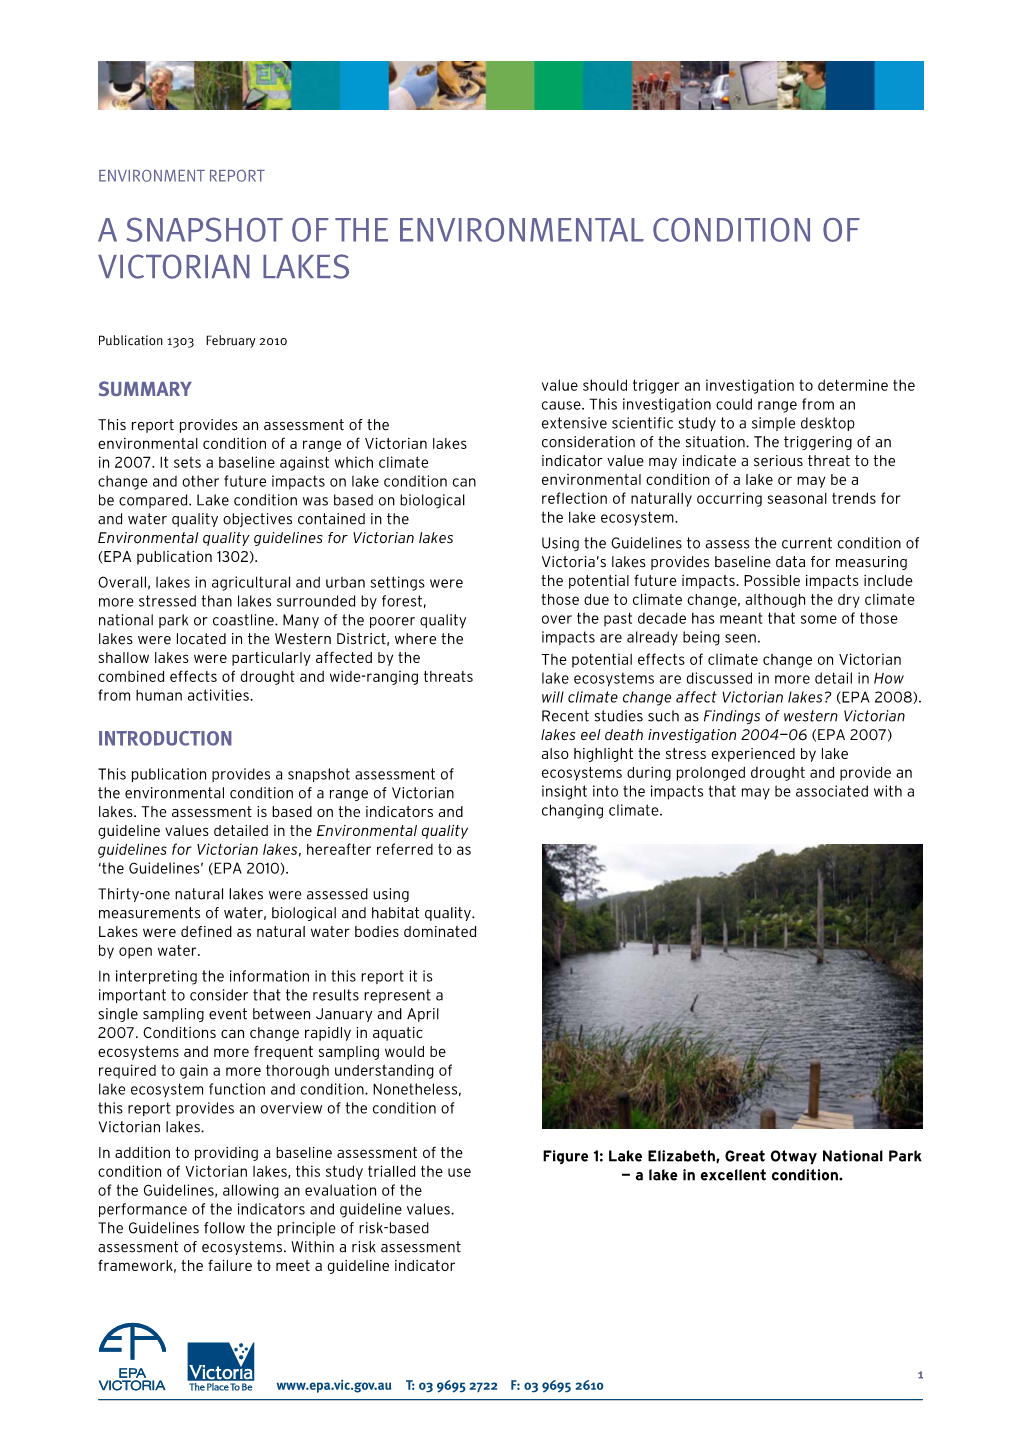 A Snapshot of the Environmental Condition of Victorian Lakes